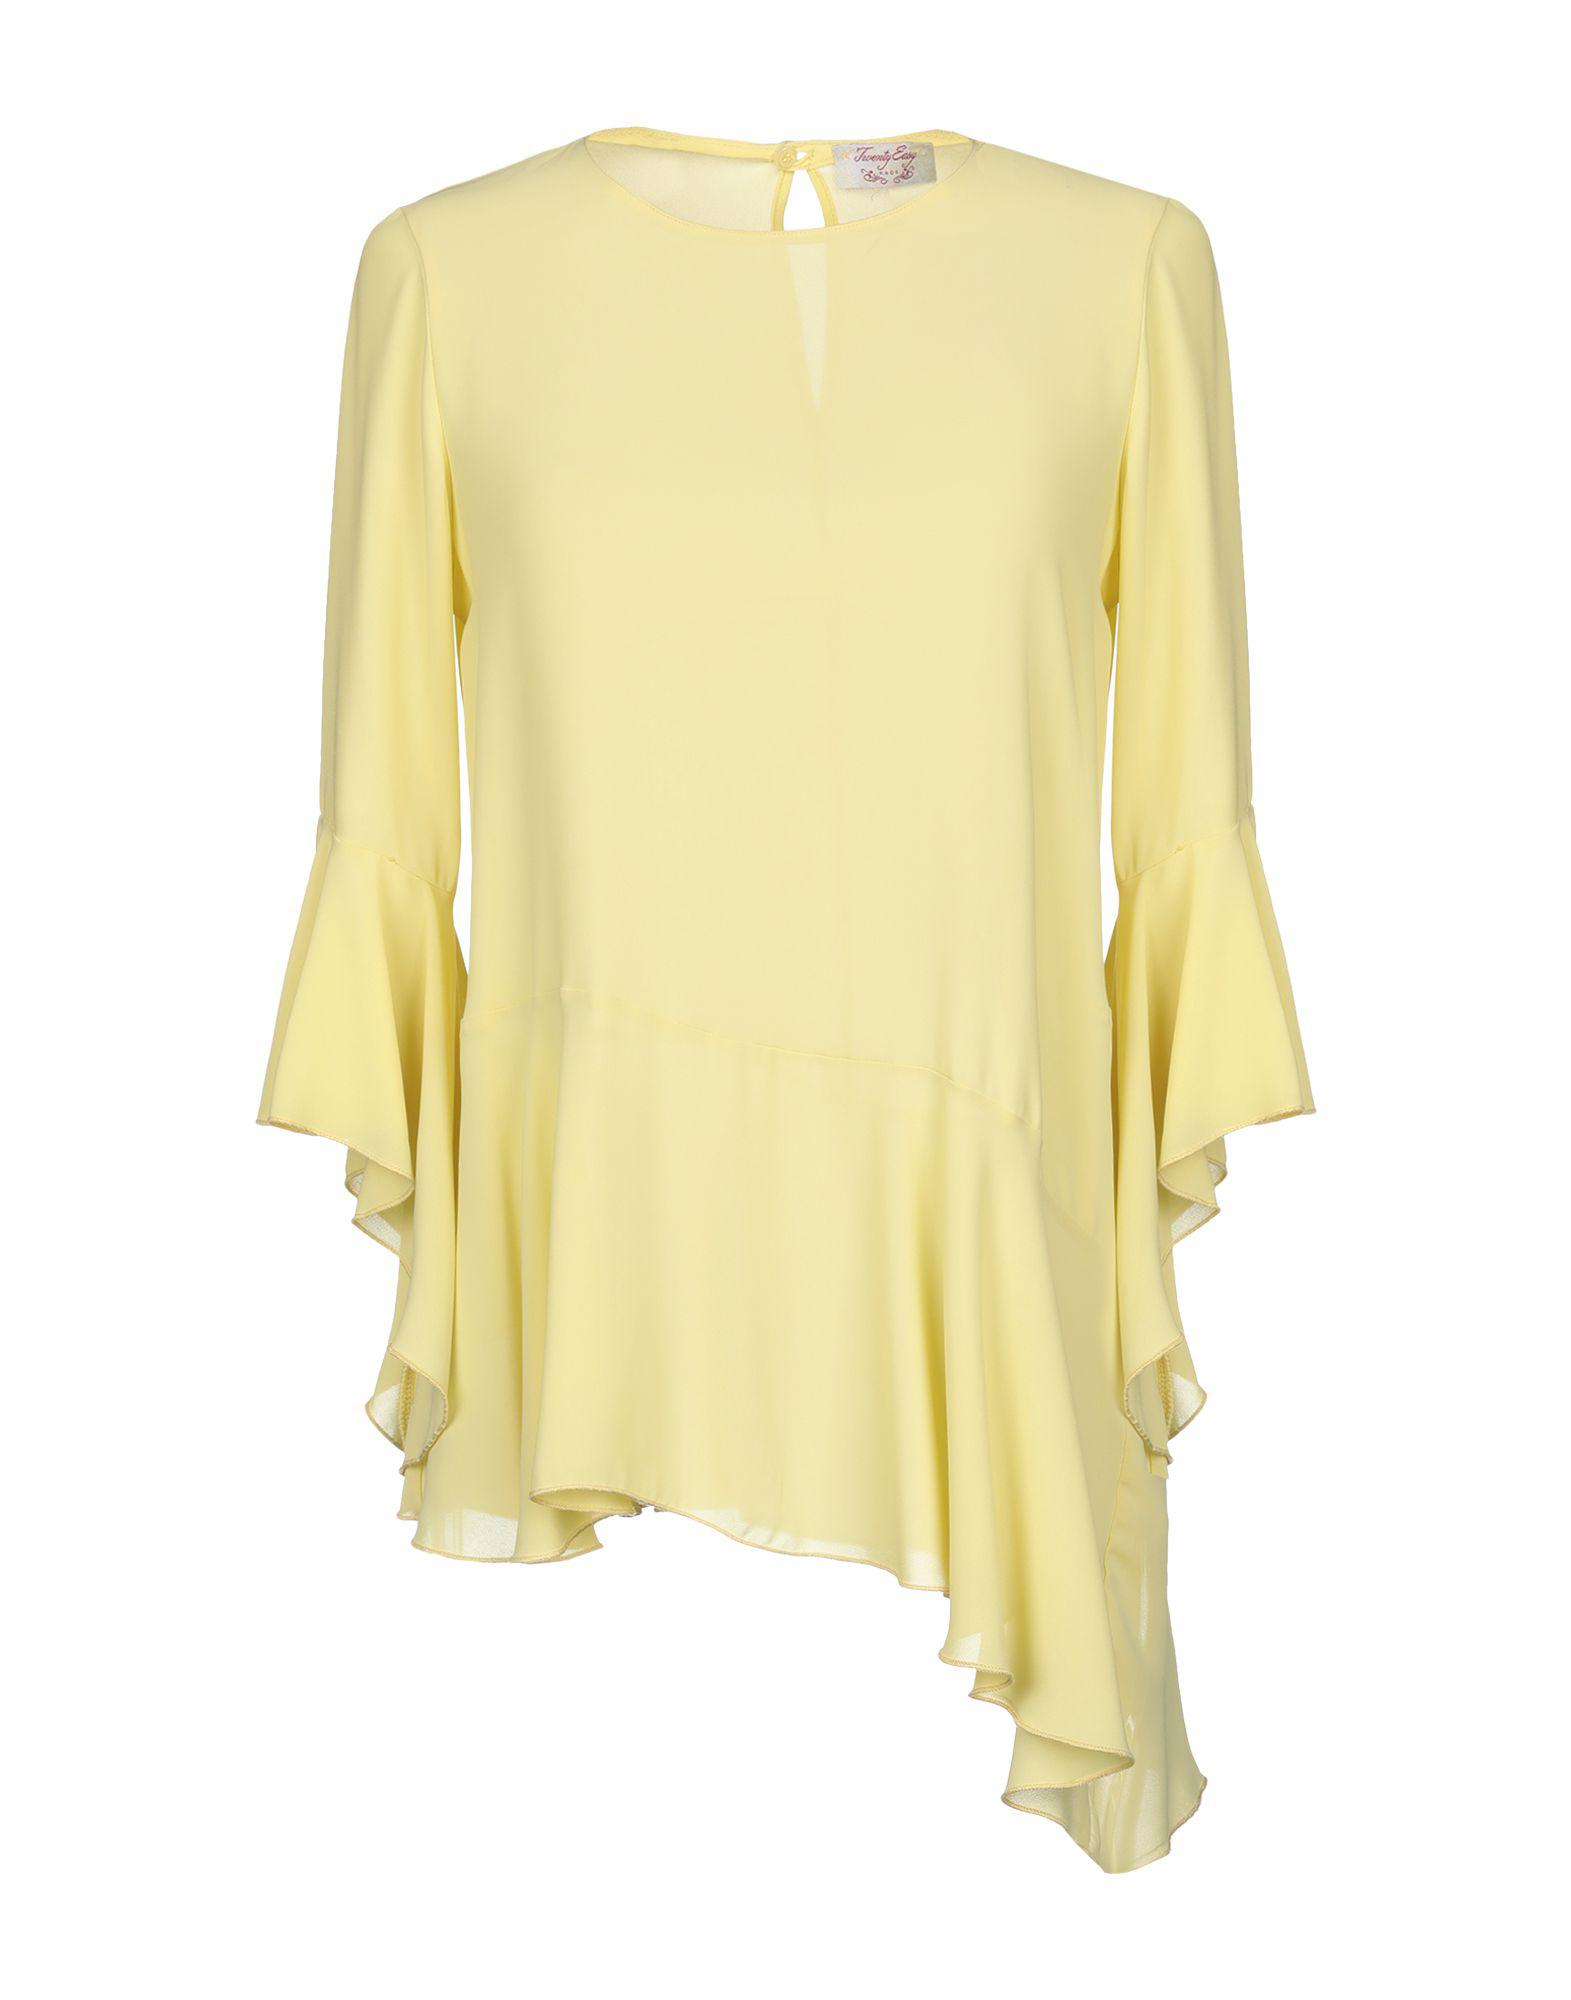 Twenty Easy By Kaos Synthetic Blouse in Acid Green (Yellow) - Lyst